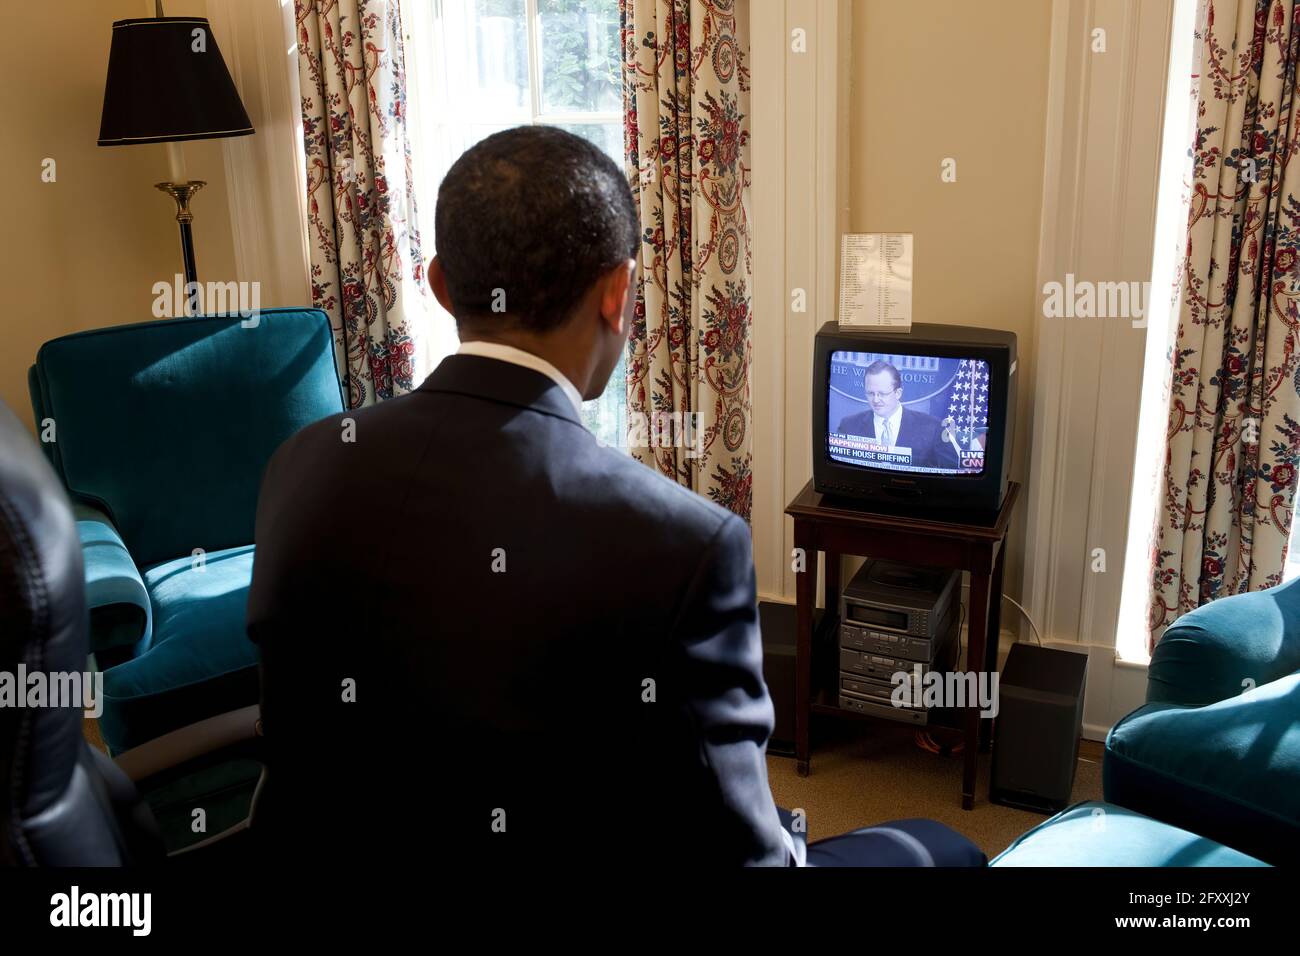 President Obama watches Press Secretary Robert Gibbs' first Press Briefing on television, in his private study off the Oval Office 1/22/09. White House Official Photo by Joyce N. Boghosian Stock Photo